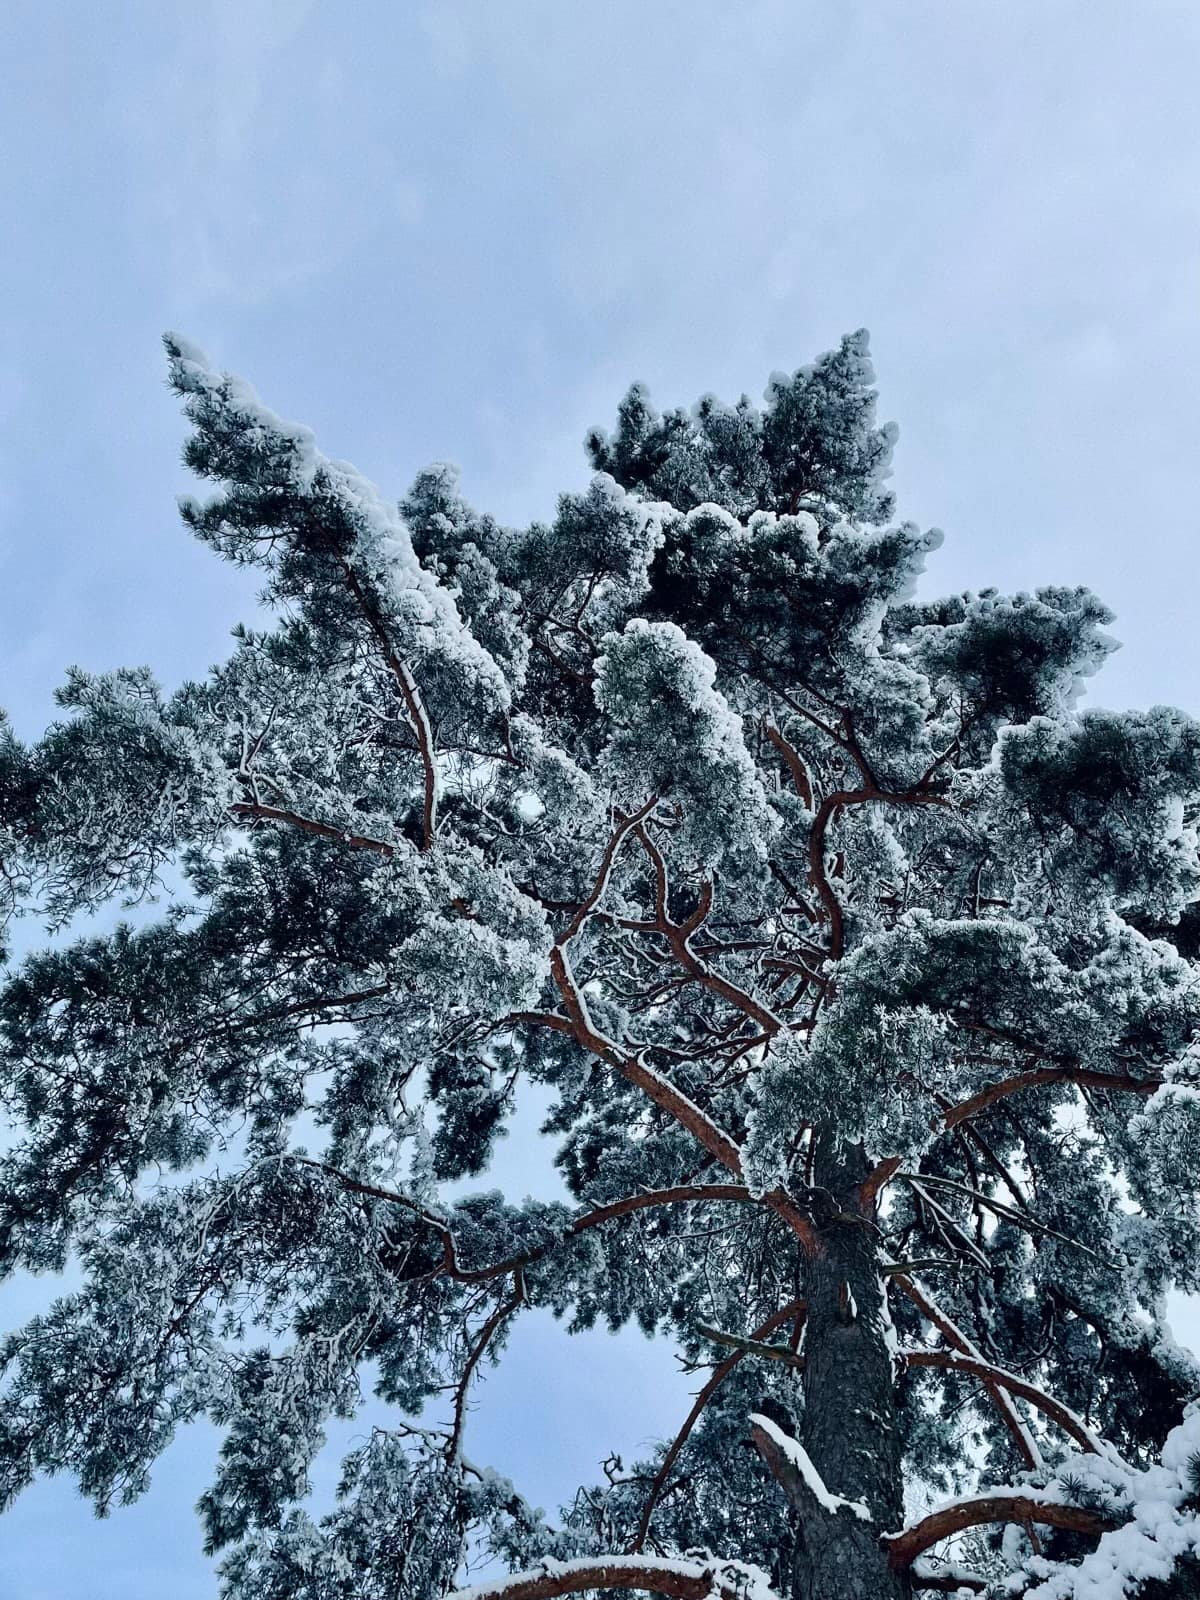 A pine tree dressed in snow. But, as the photo is shot from below, close to the tree trunk, some green is shown as well.